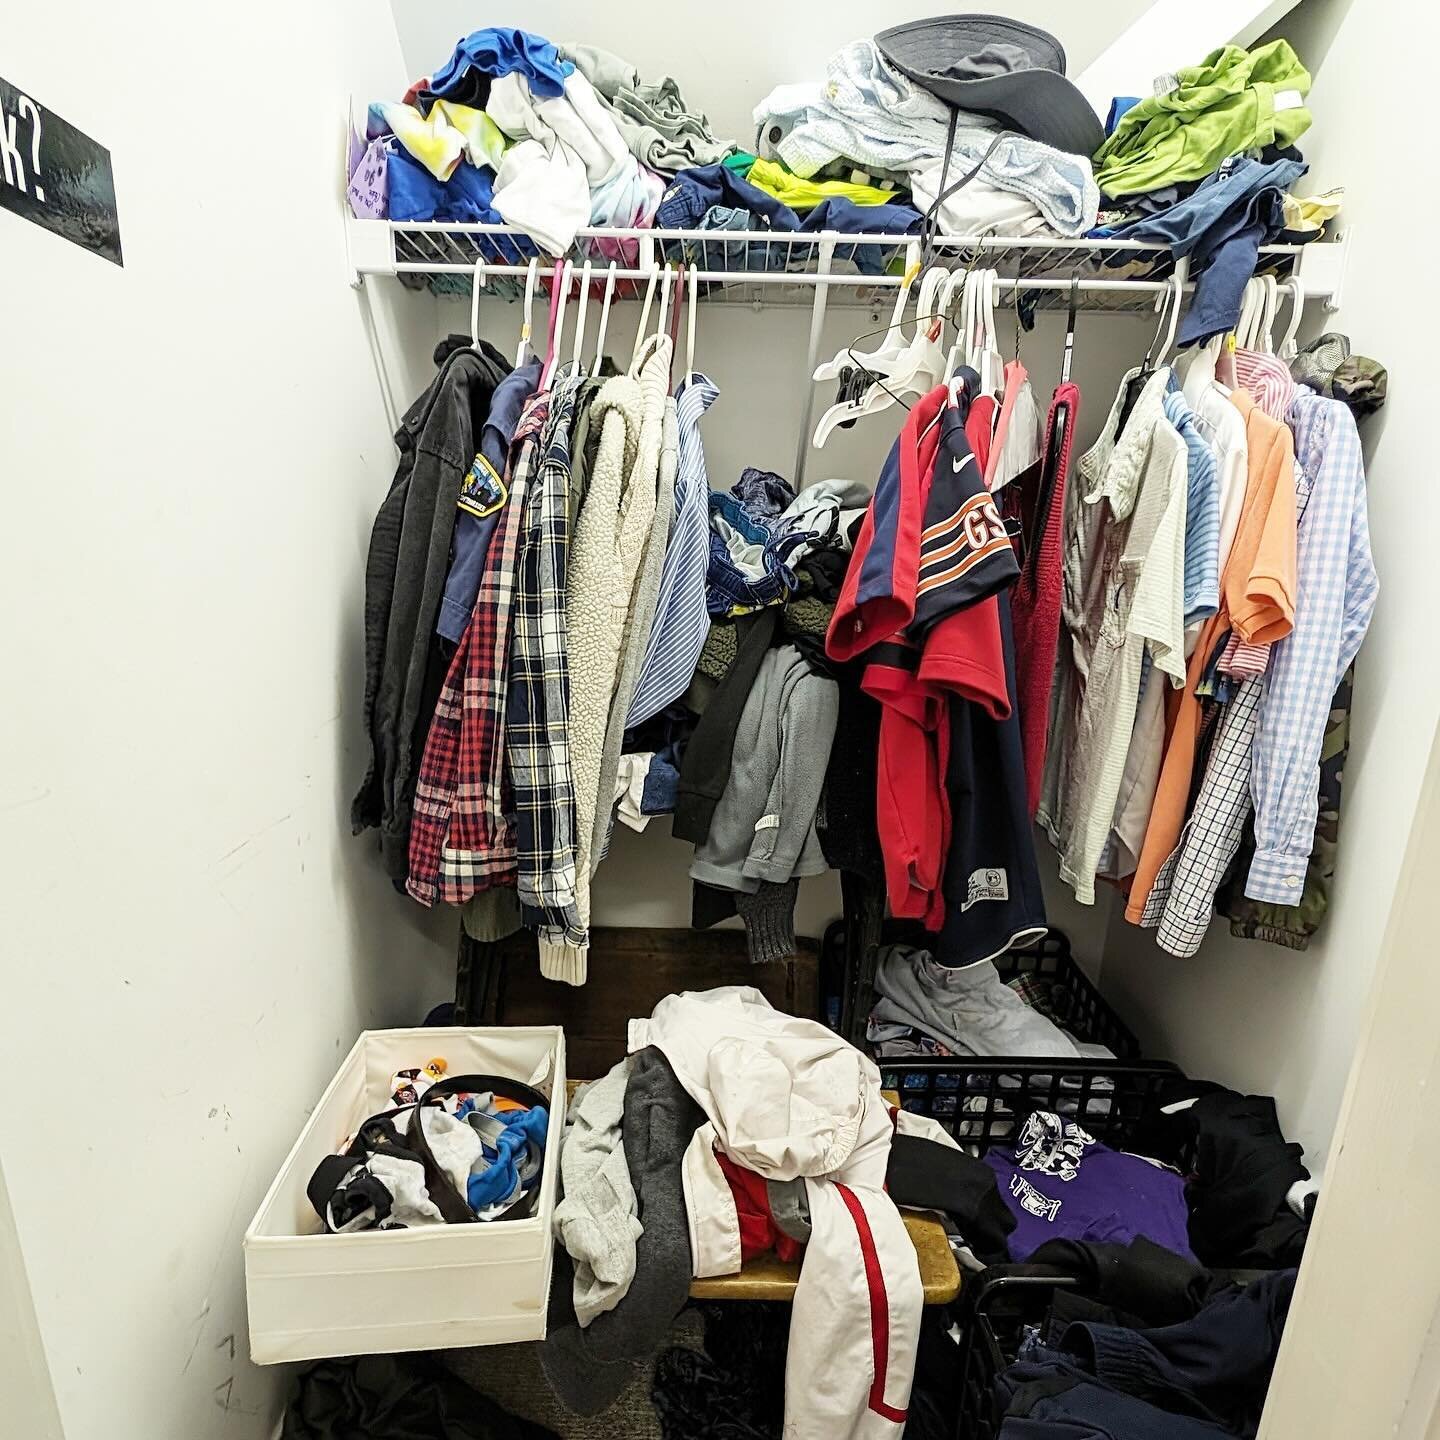 👕 We had an idea for making this closet work for @bluegrassred &lsquo;s son but &hellip; it wasn&rsquo;t going to work. We regrouped, got new supplies and created something that will work for him and the limited mobility in his right hand. Super exc